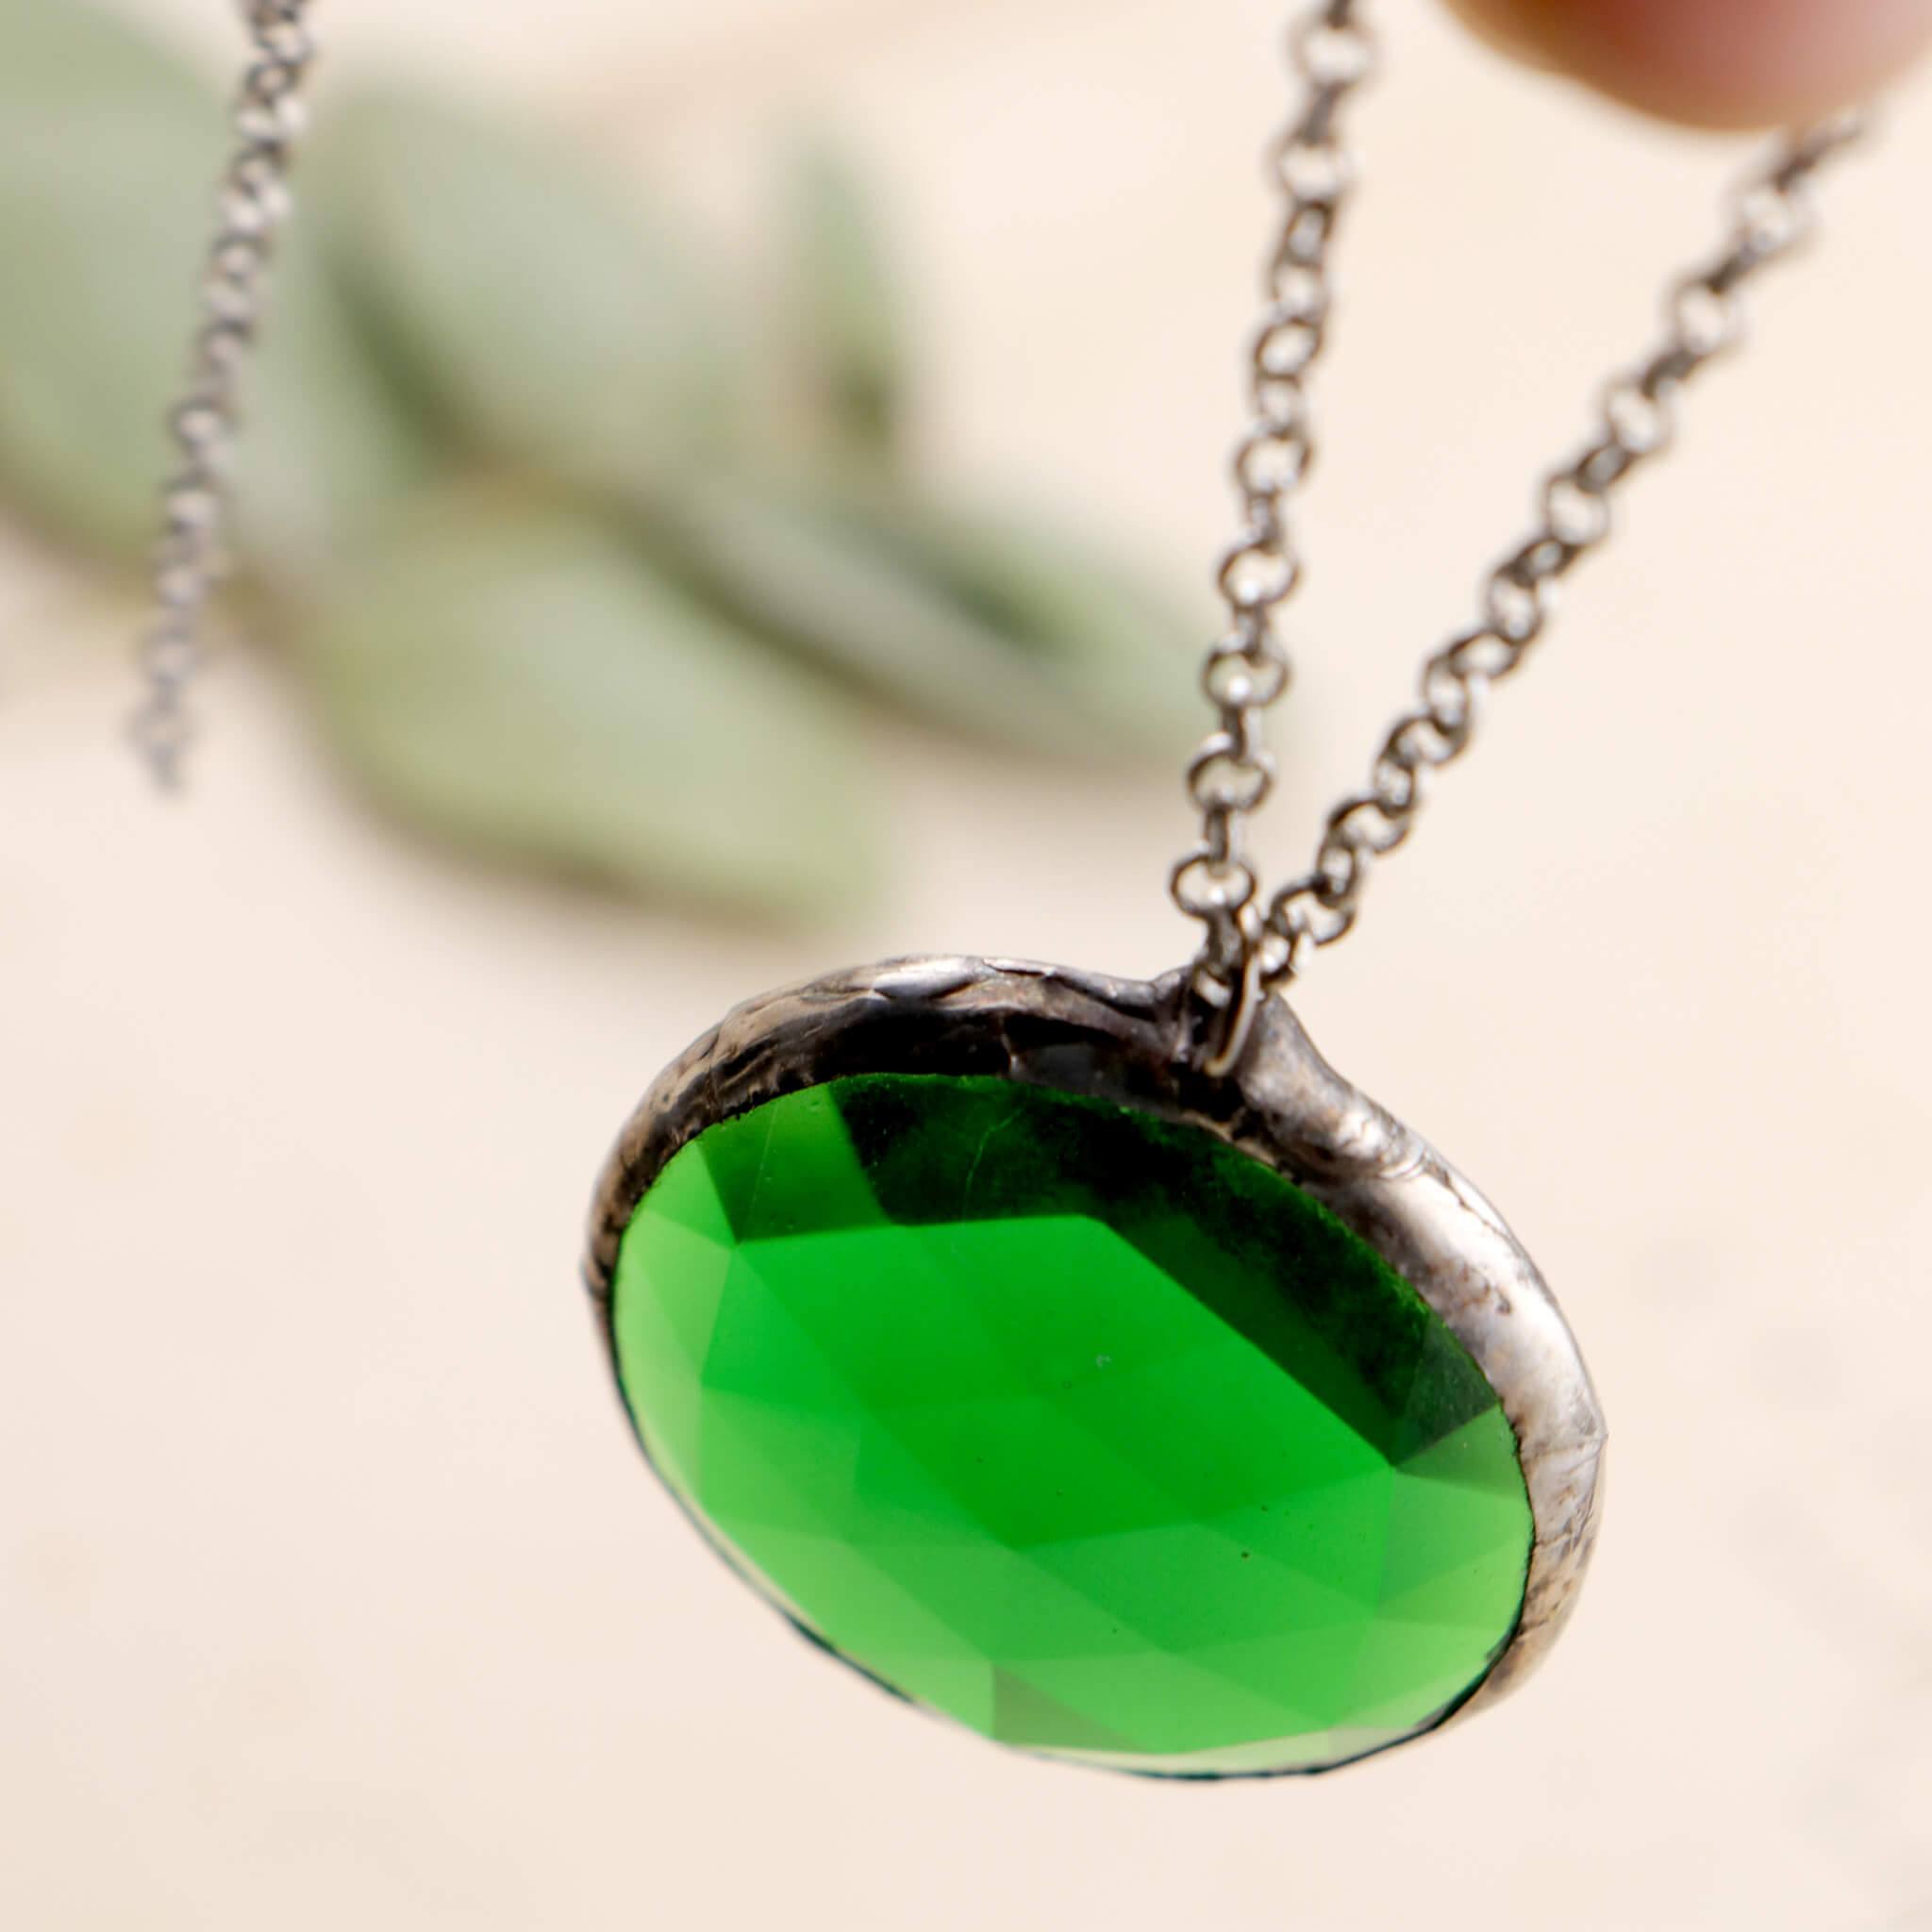 Faceted emerald glass framed into necklace